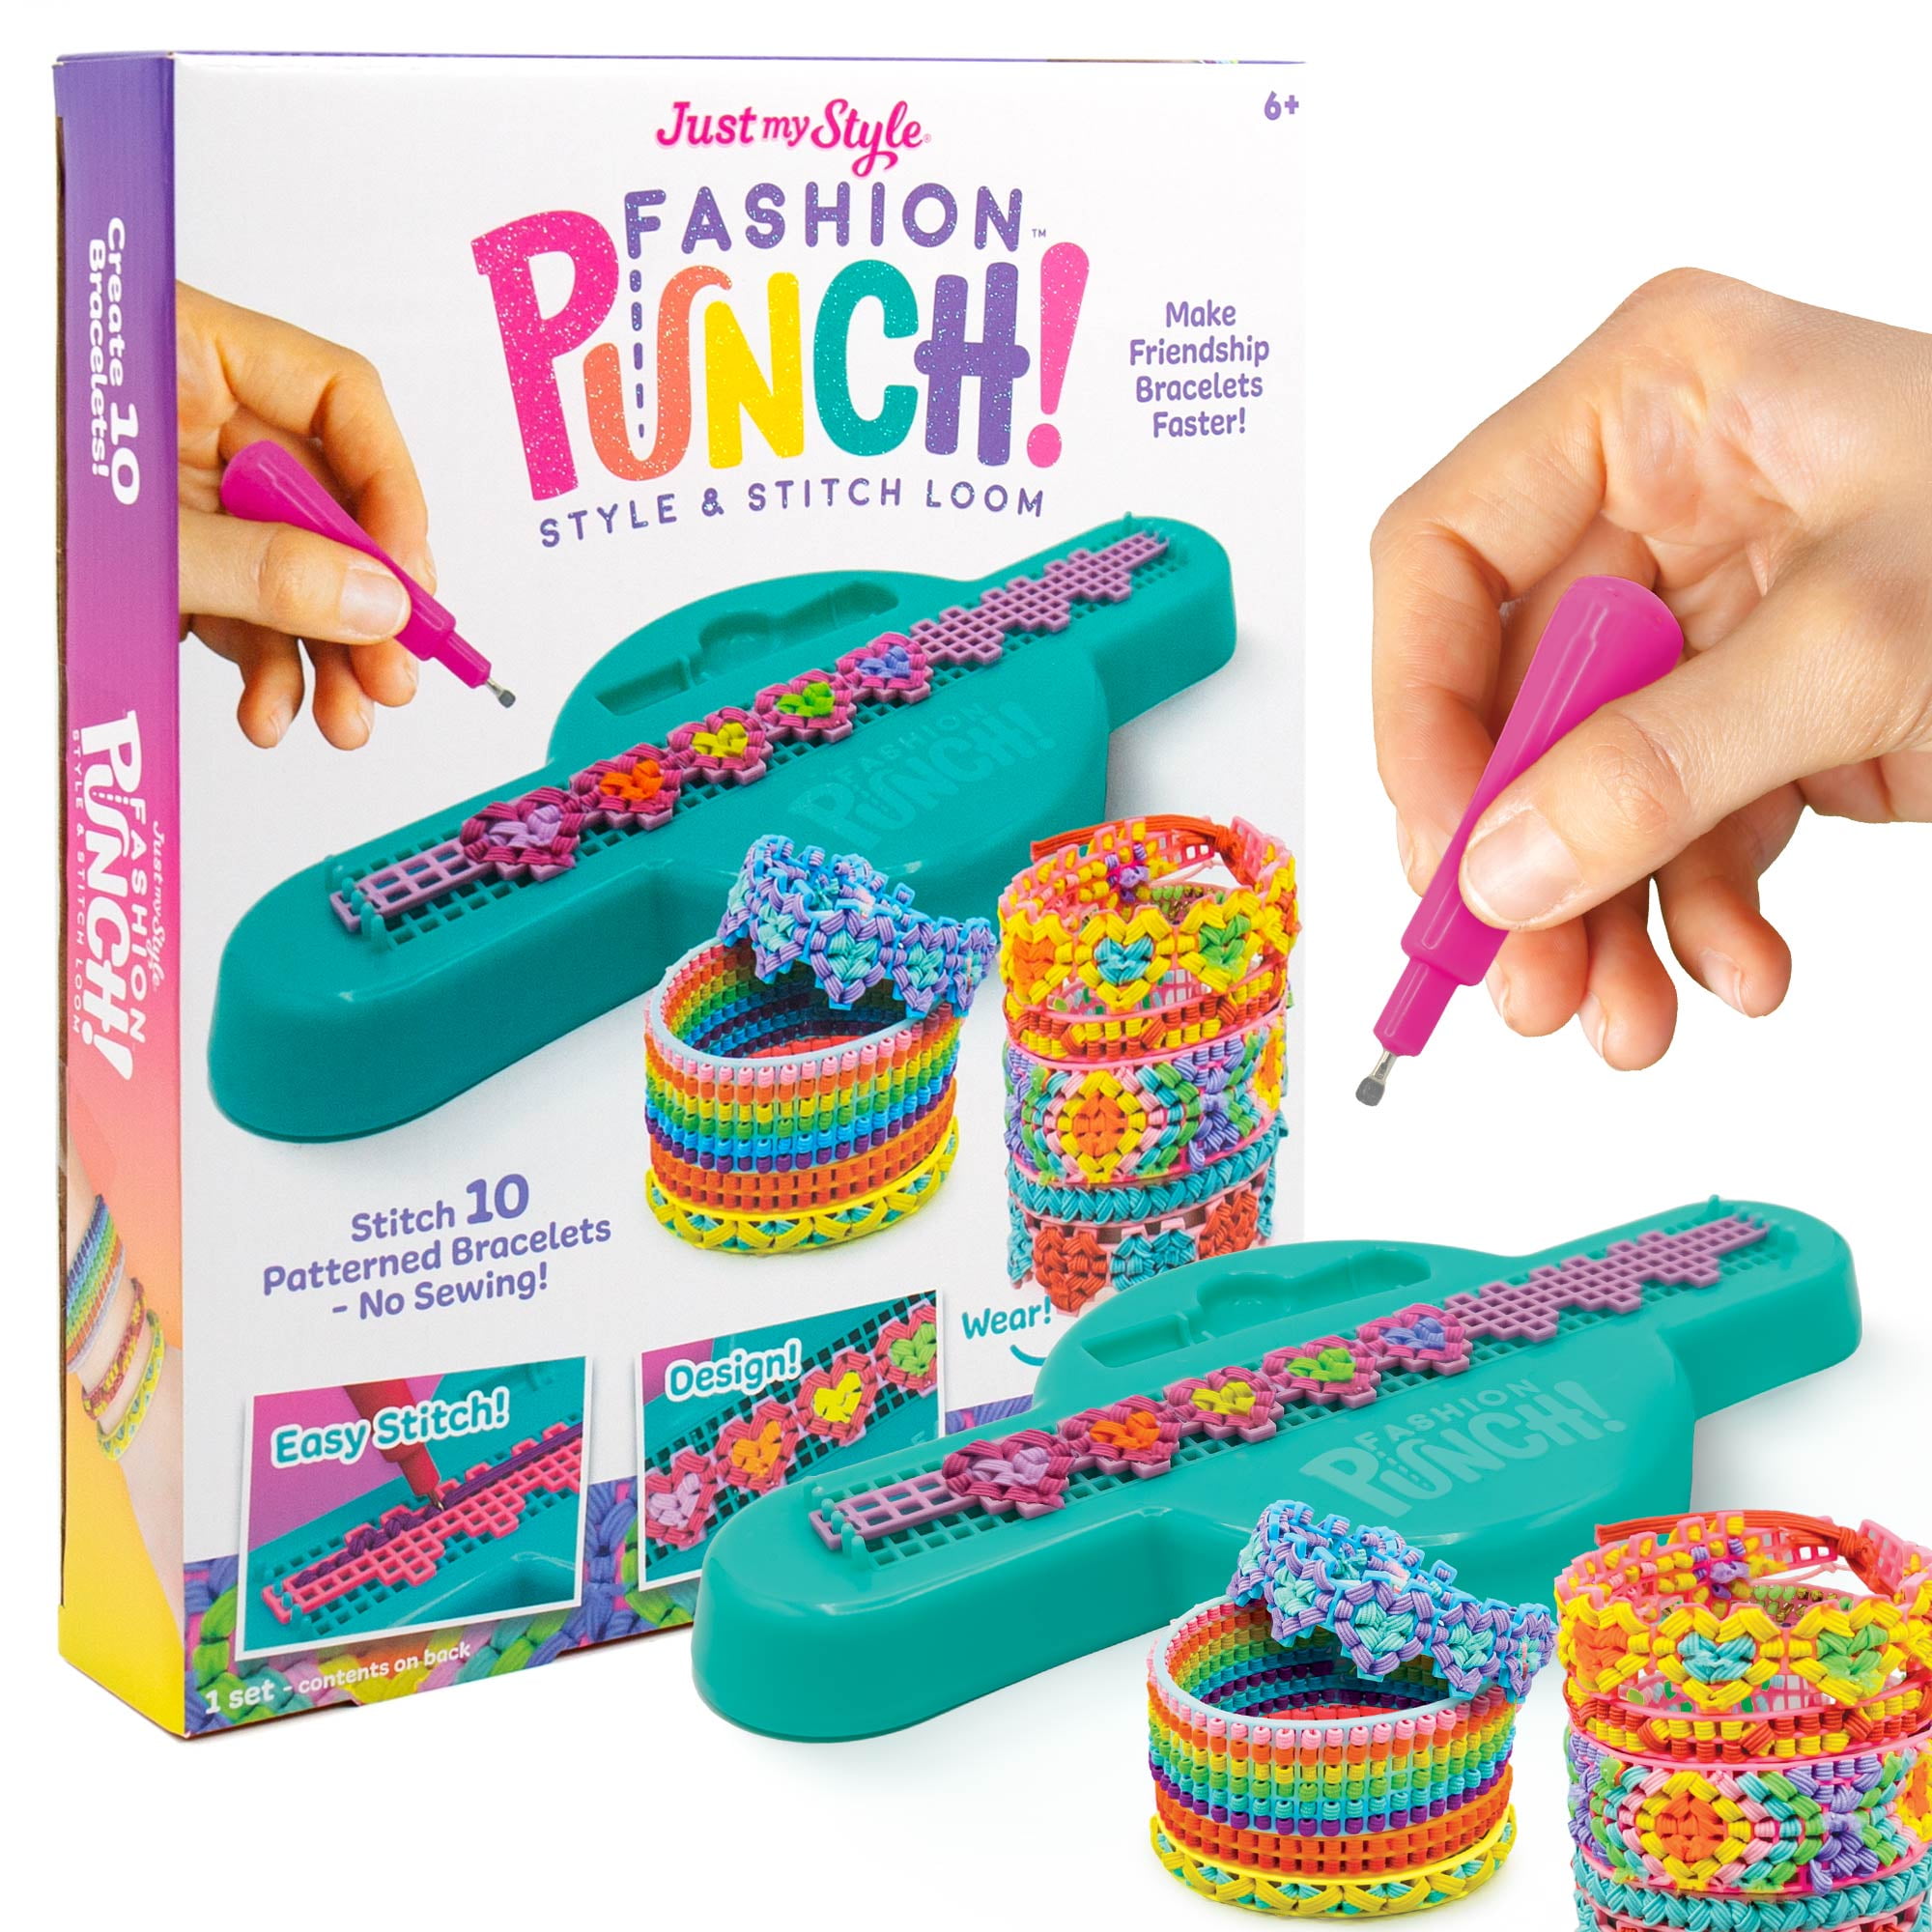 Just My Style Fashion Punch Style & Stitch Loom, Boys and Girl, Ages 6+